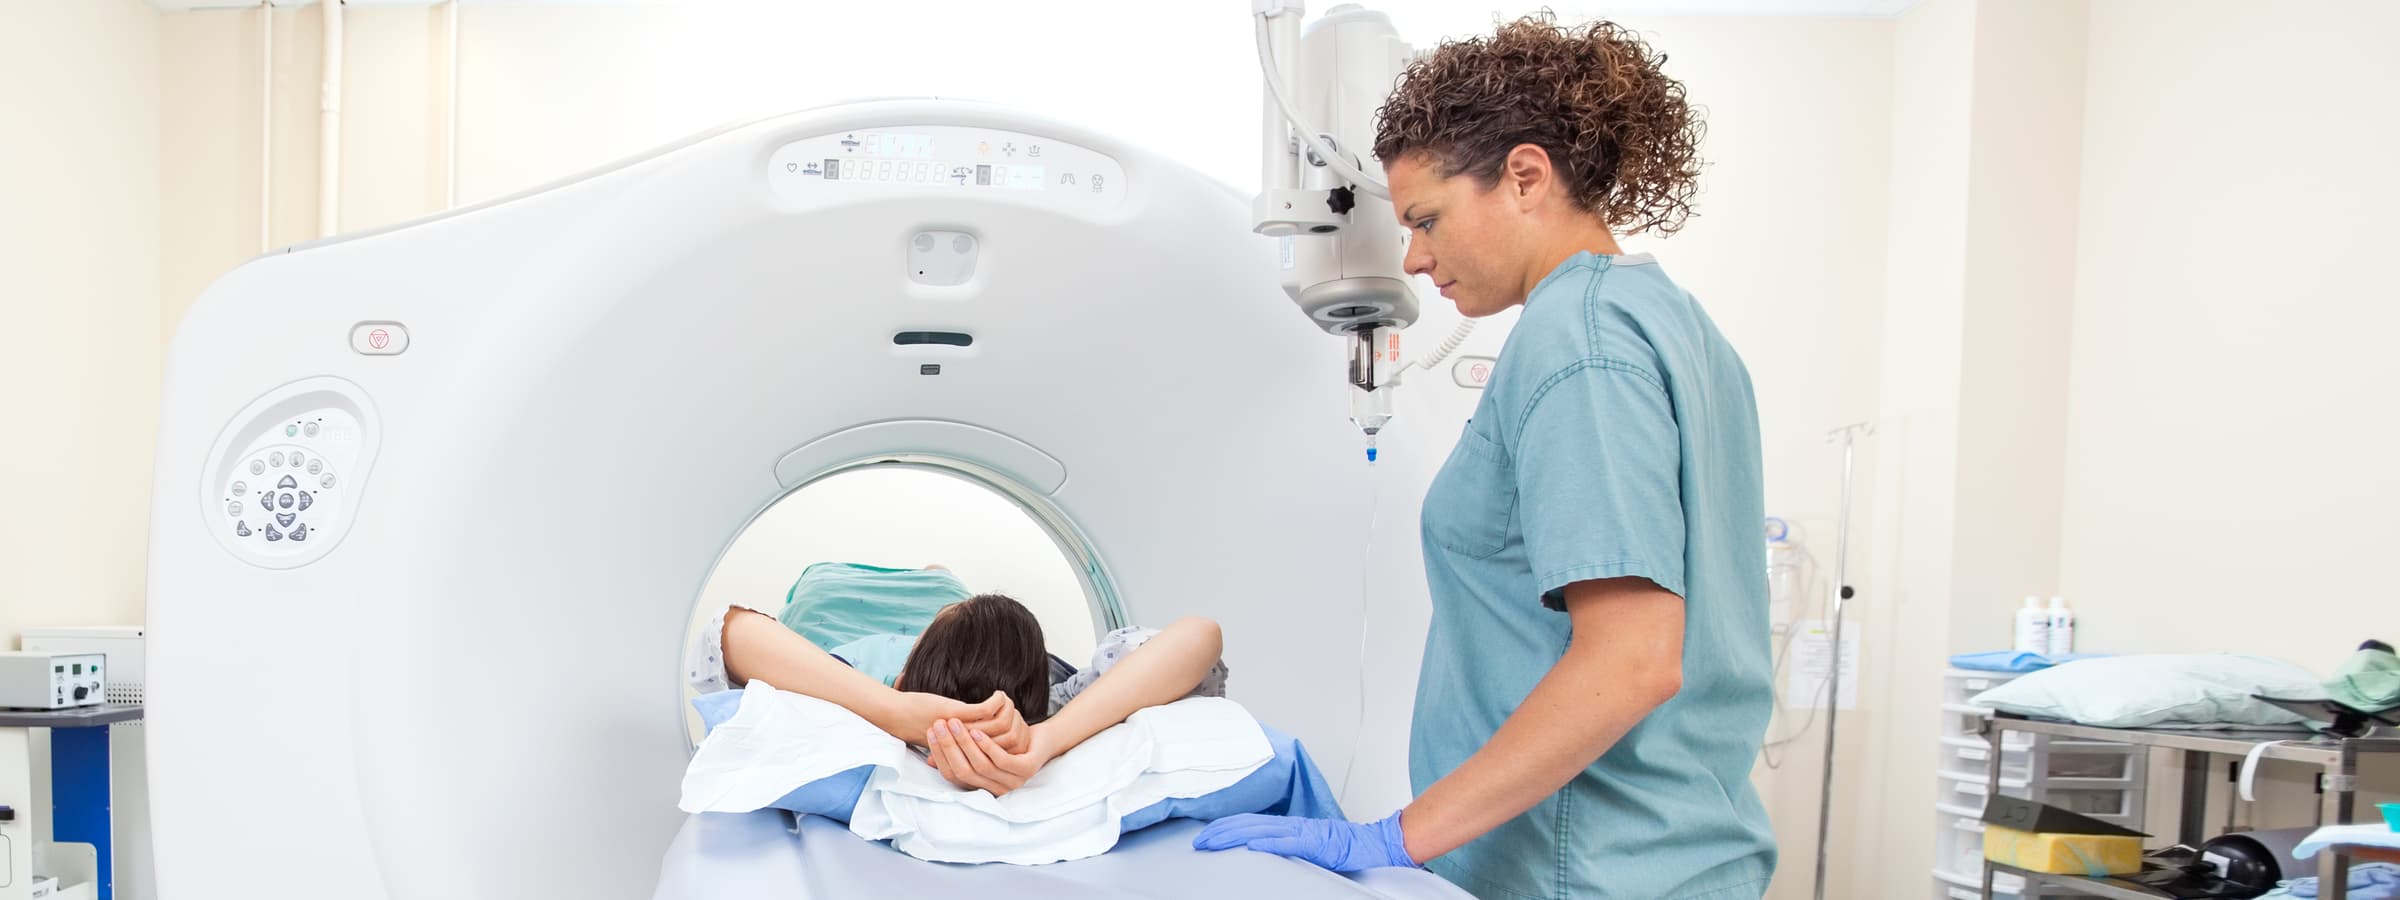 A patient getting a CT scan.